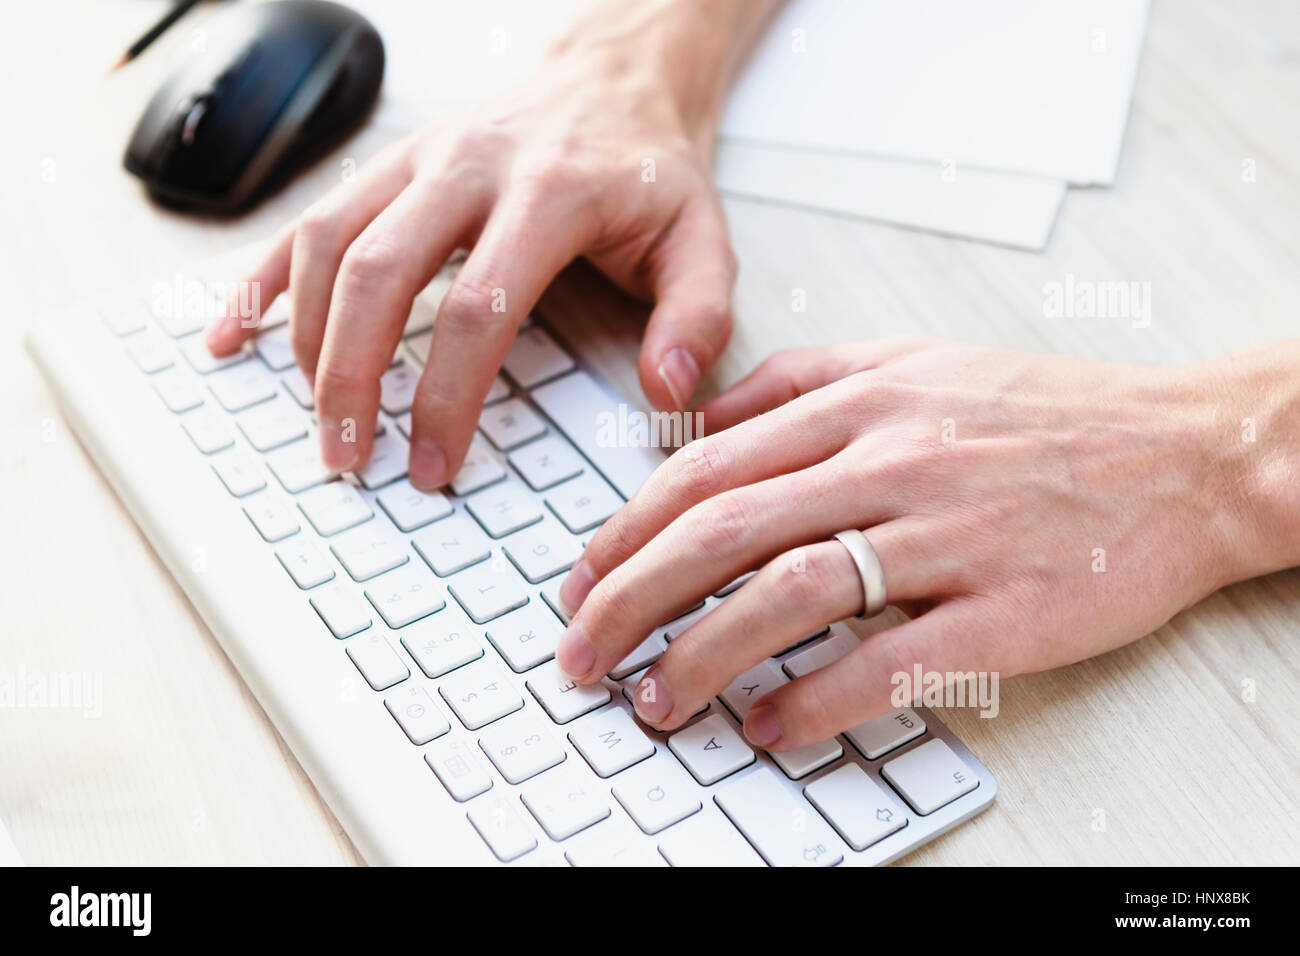 Male hands typing on computer keyboard Stock Photo